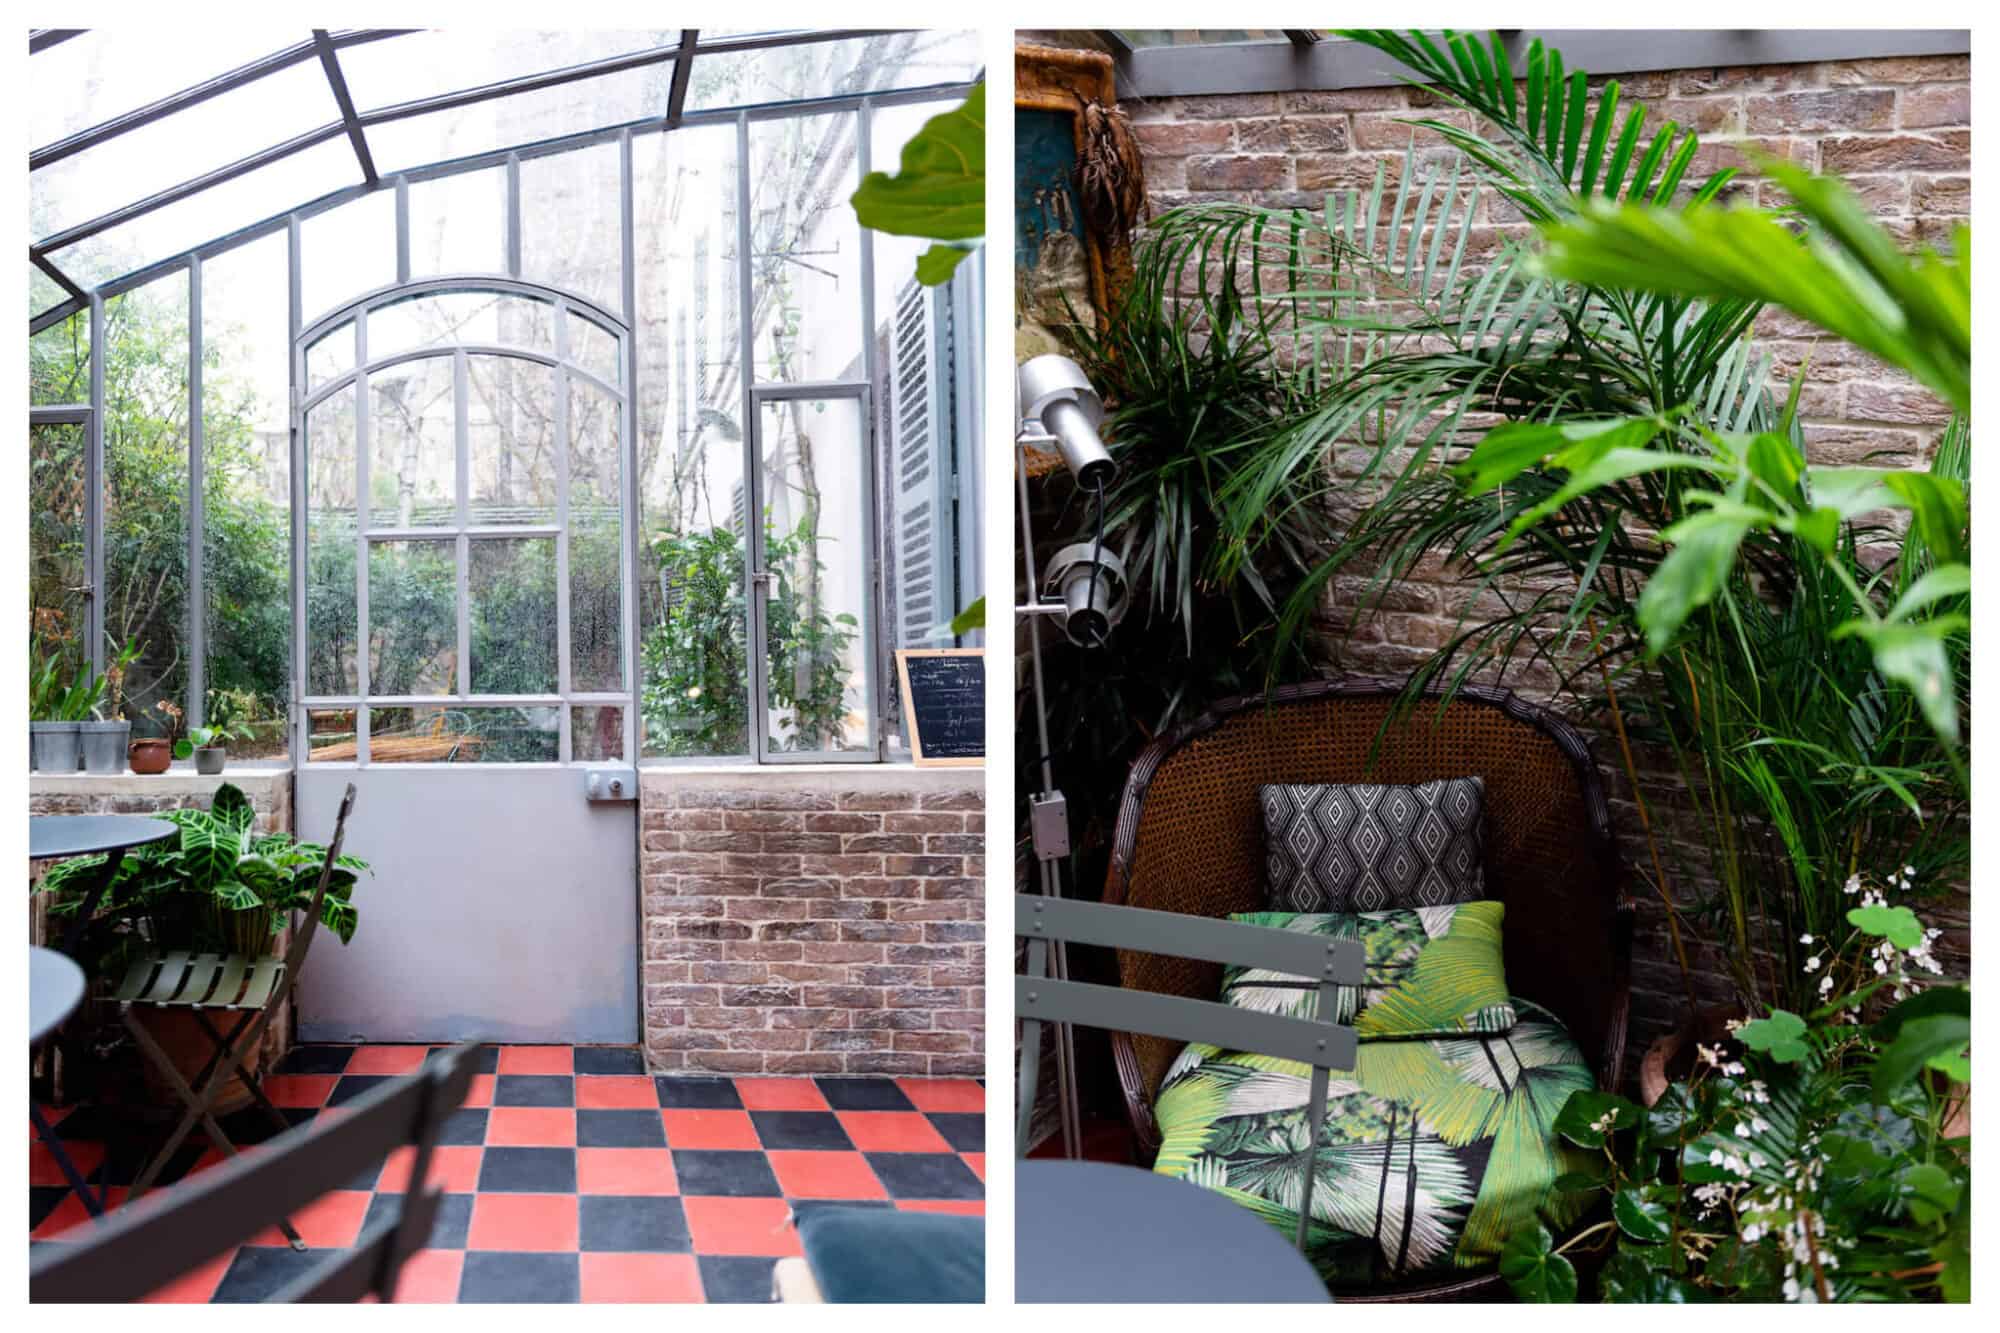 Treize au Jardin restaurant and cafe, filled with bright patterns and colorful plants.